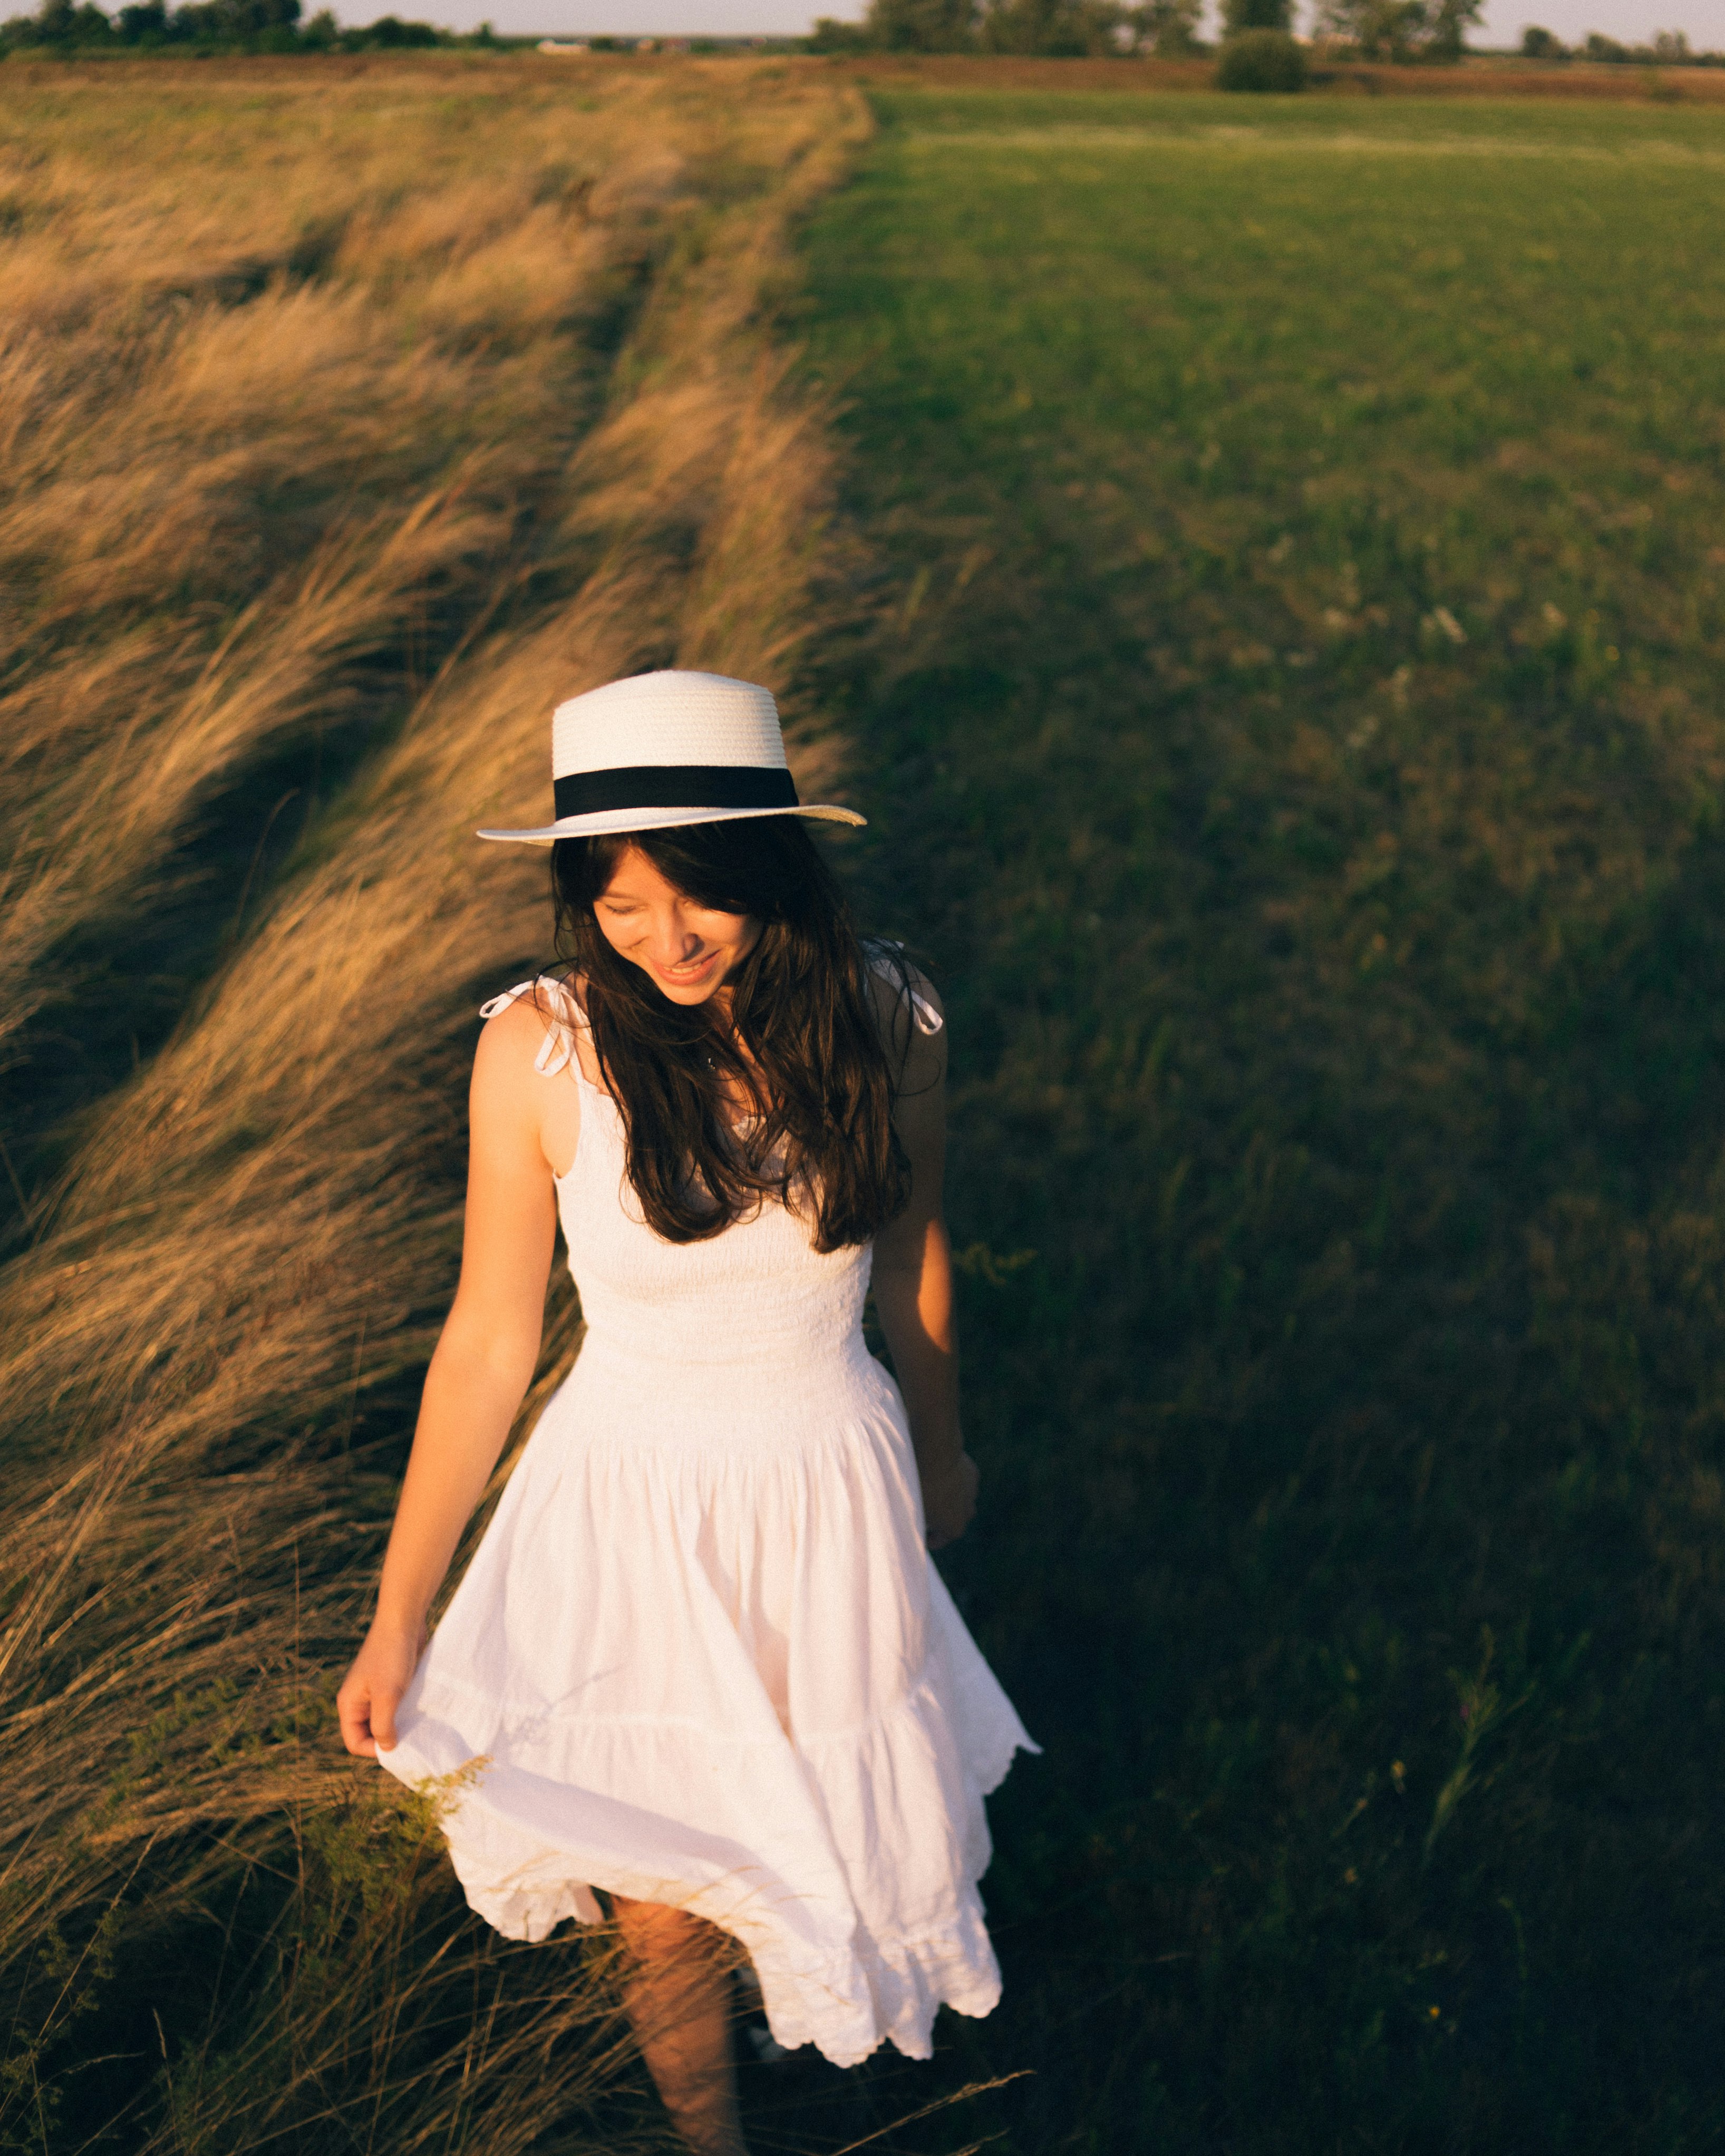 woman in white sleeveless dress wearing white hat standing on green grass field during daytime